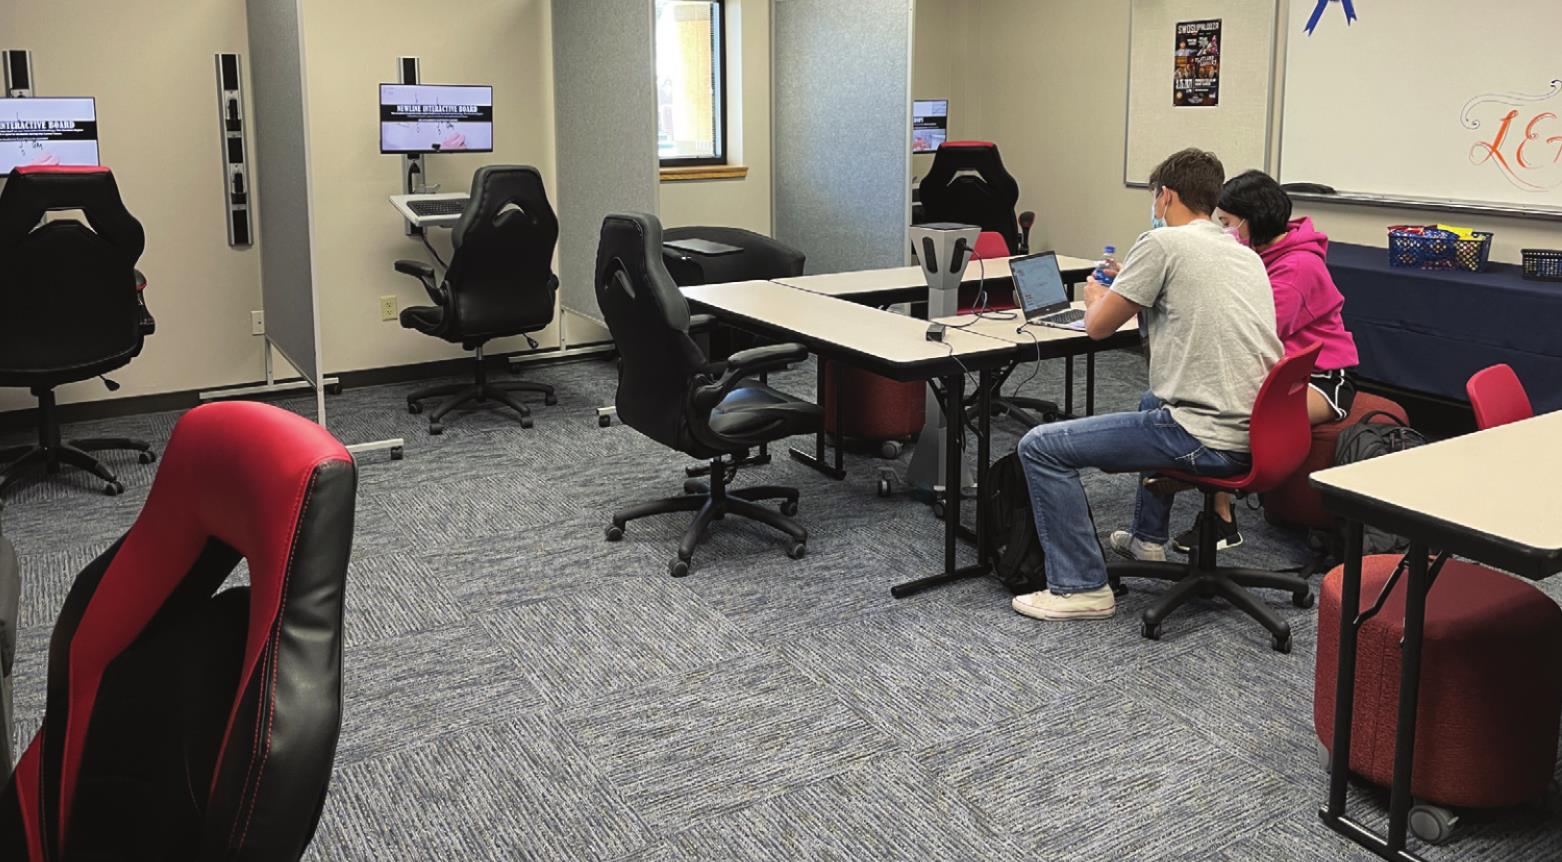 Pictured is the new learning lounge located inside the Stafford Center Room 118 at Southwestern Oklahoma State University campus. The lounge is welcome to all SWOSU students. Montgomery Malone/WDN